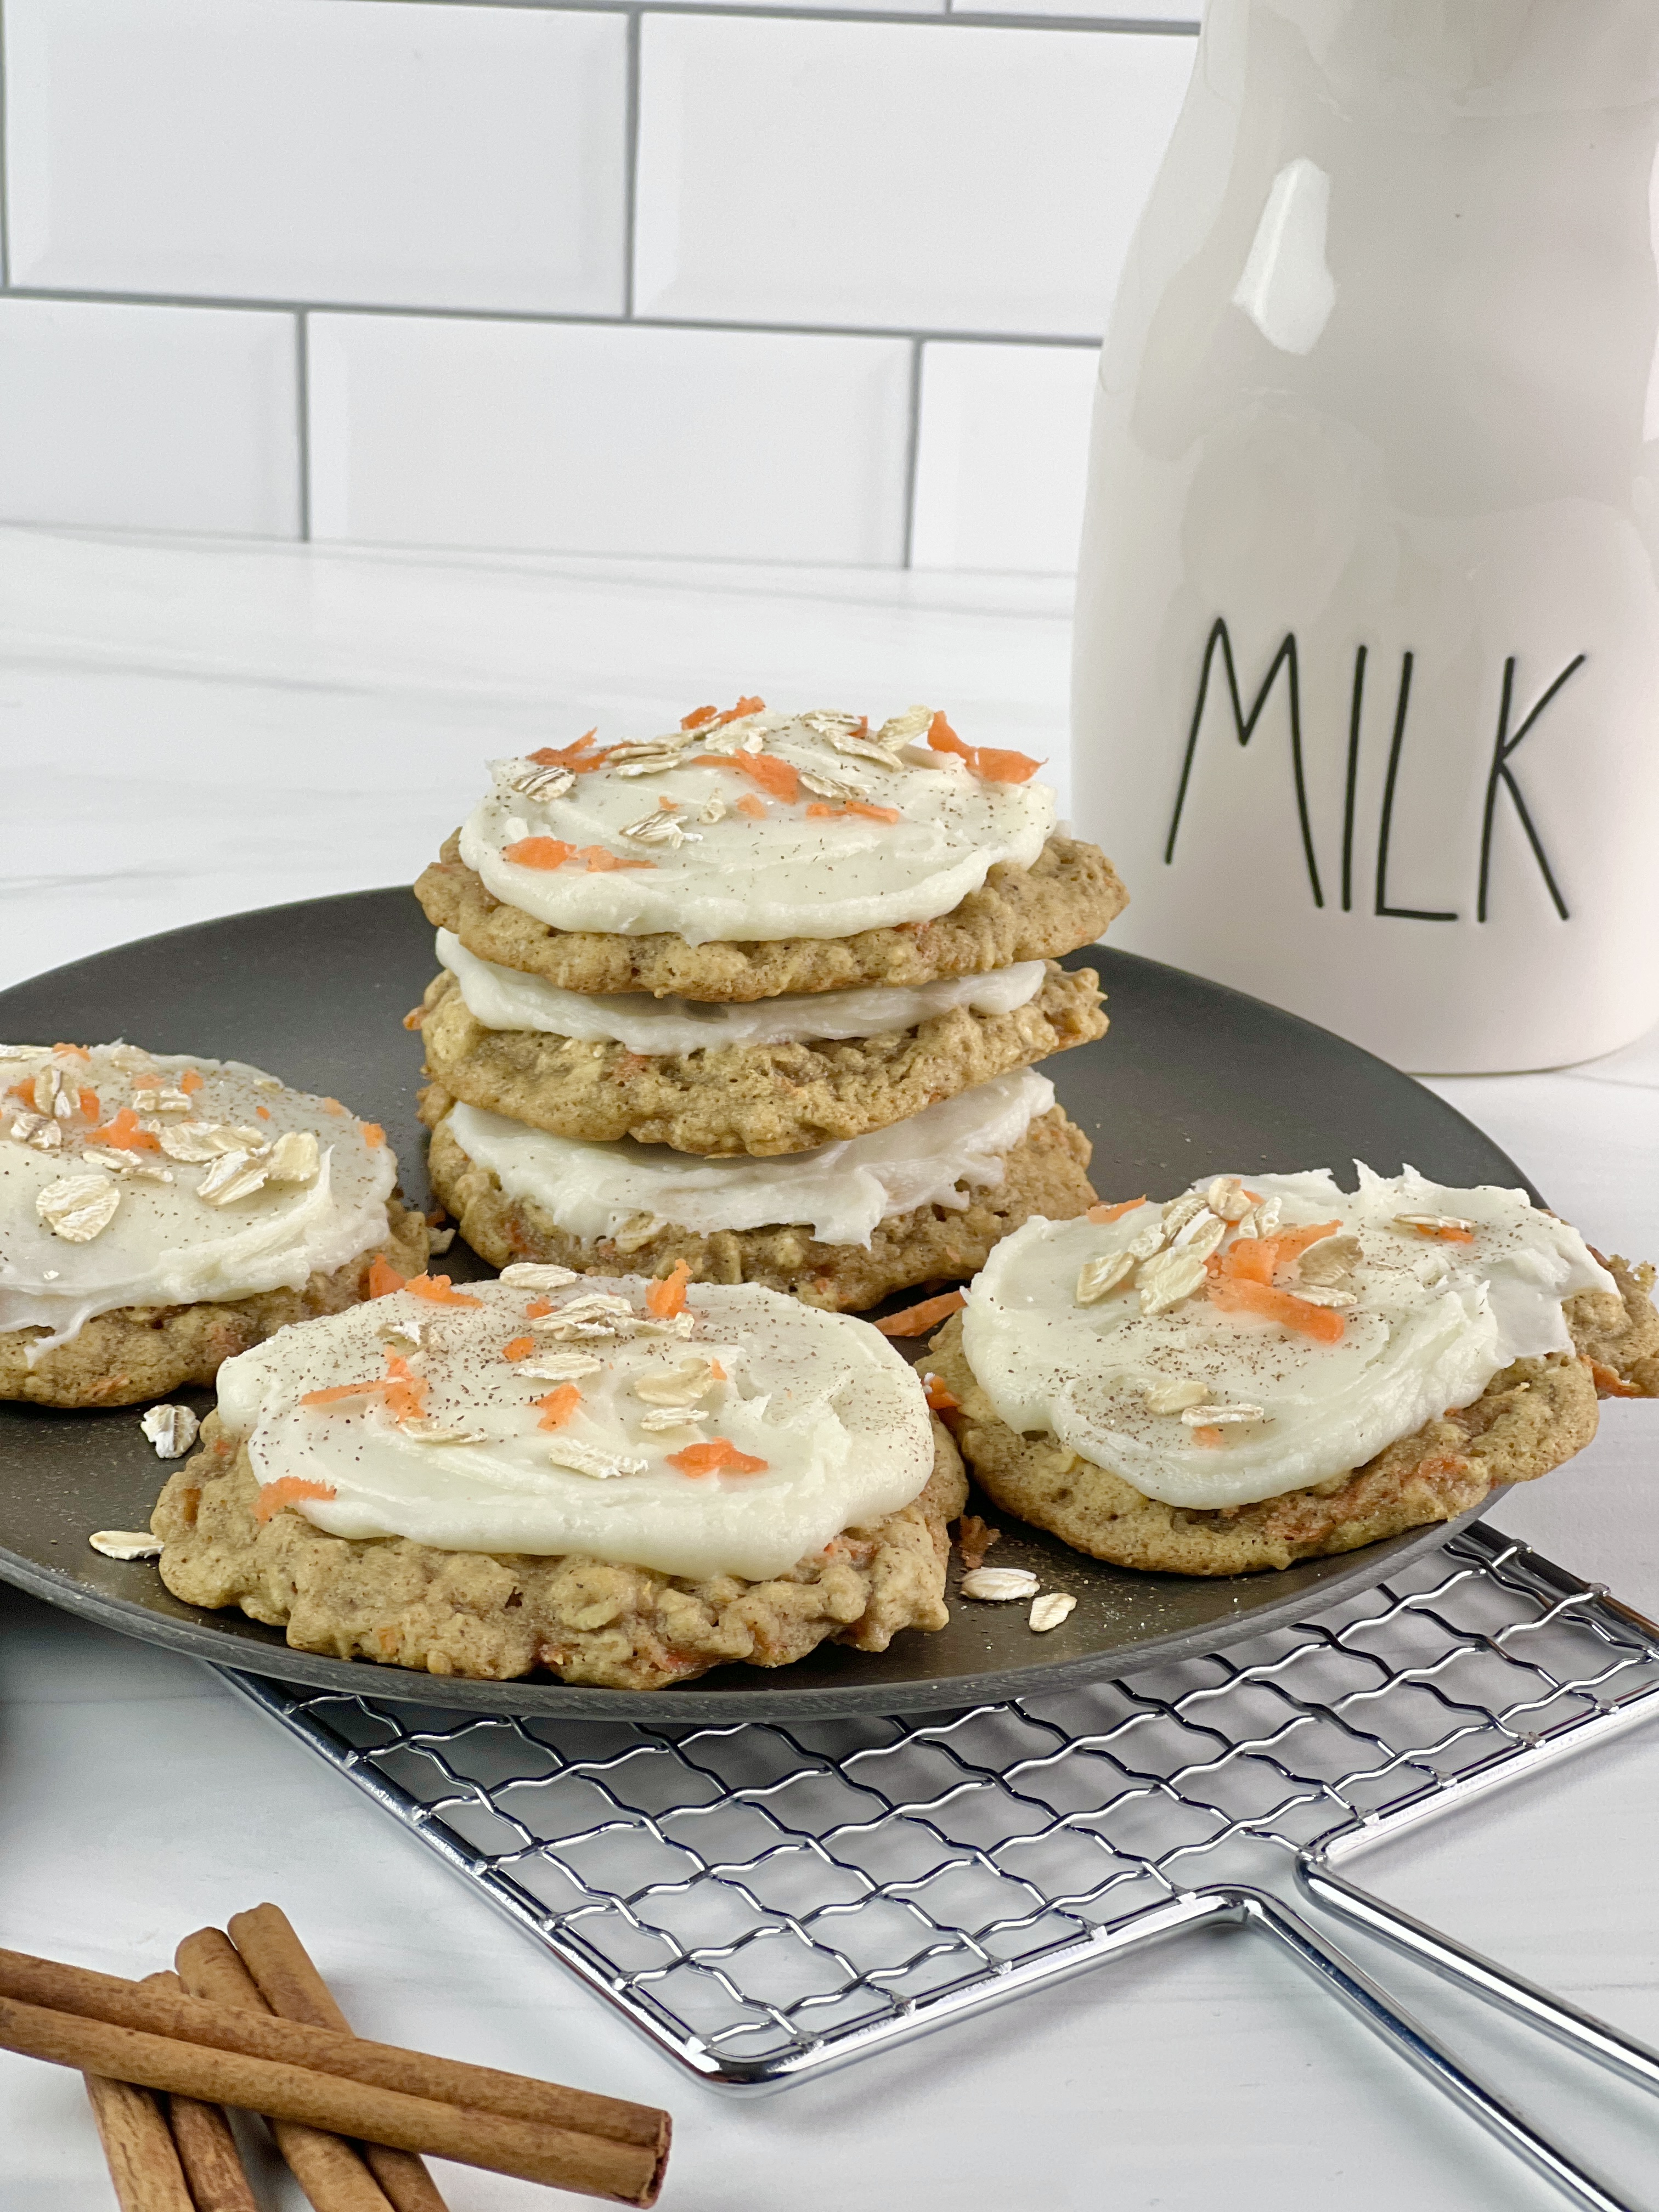 These soft and chewy carrot cake cookies with cream cheese frosting are so delicious and easy to make.